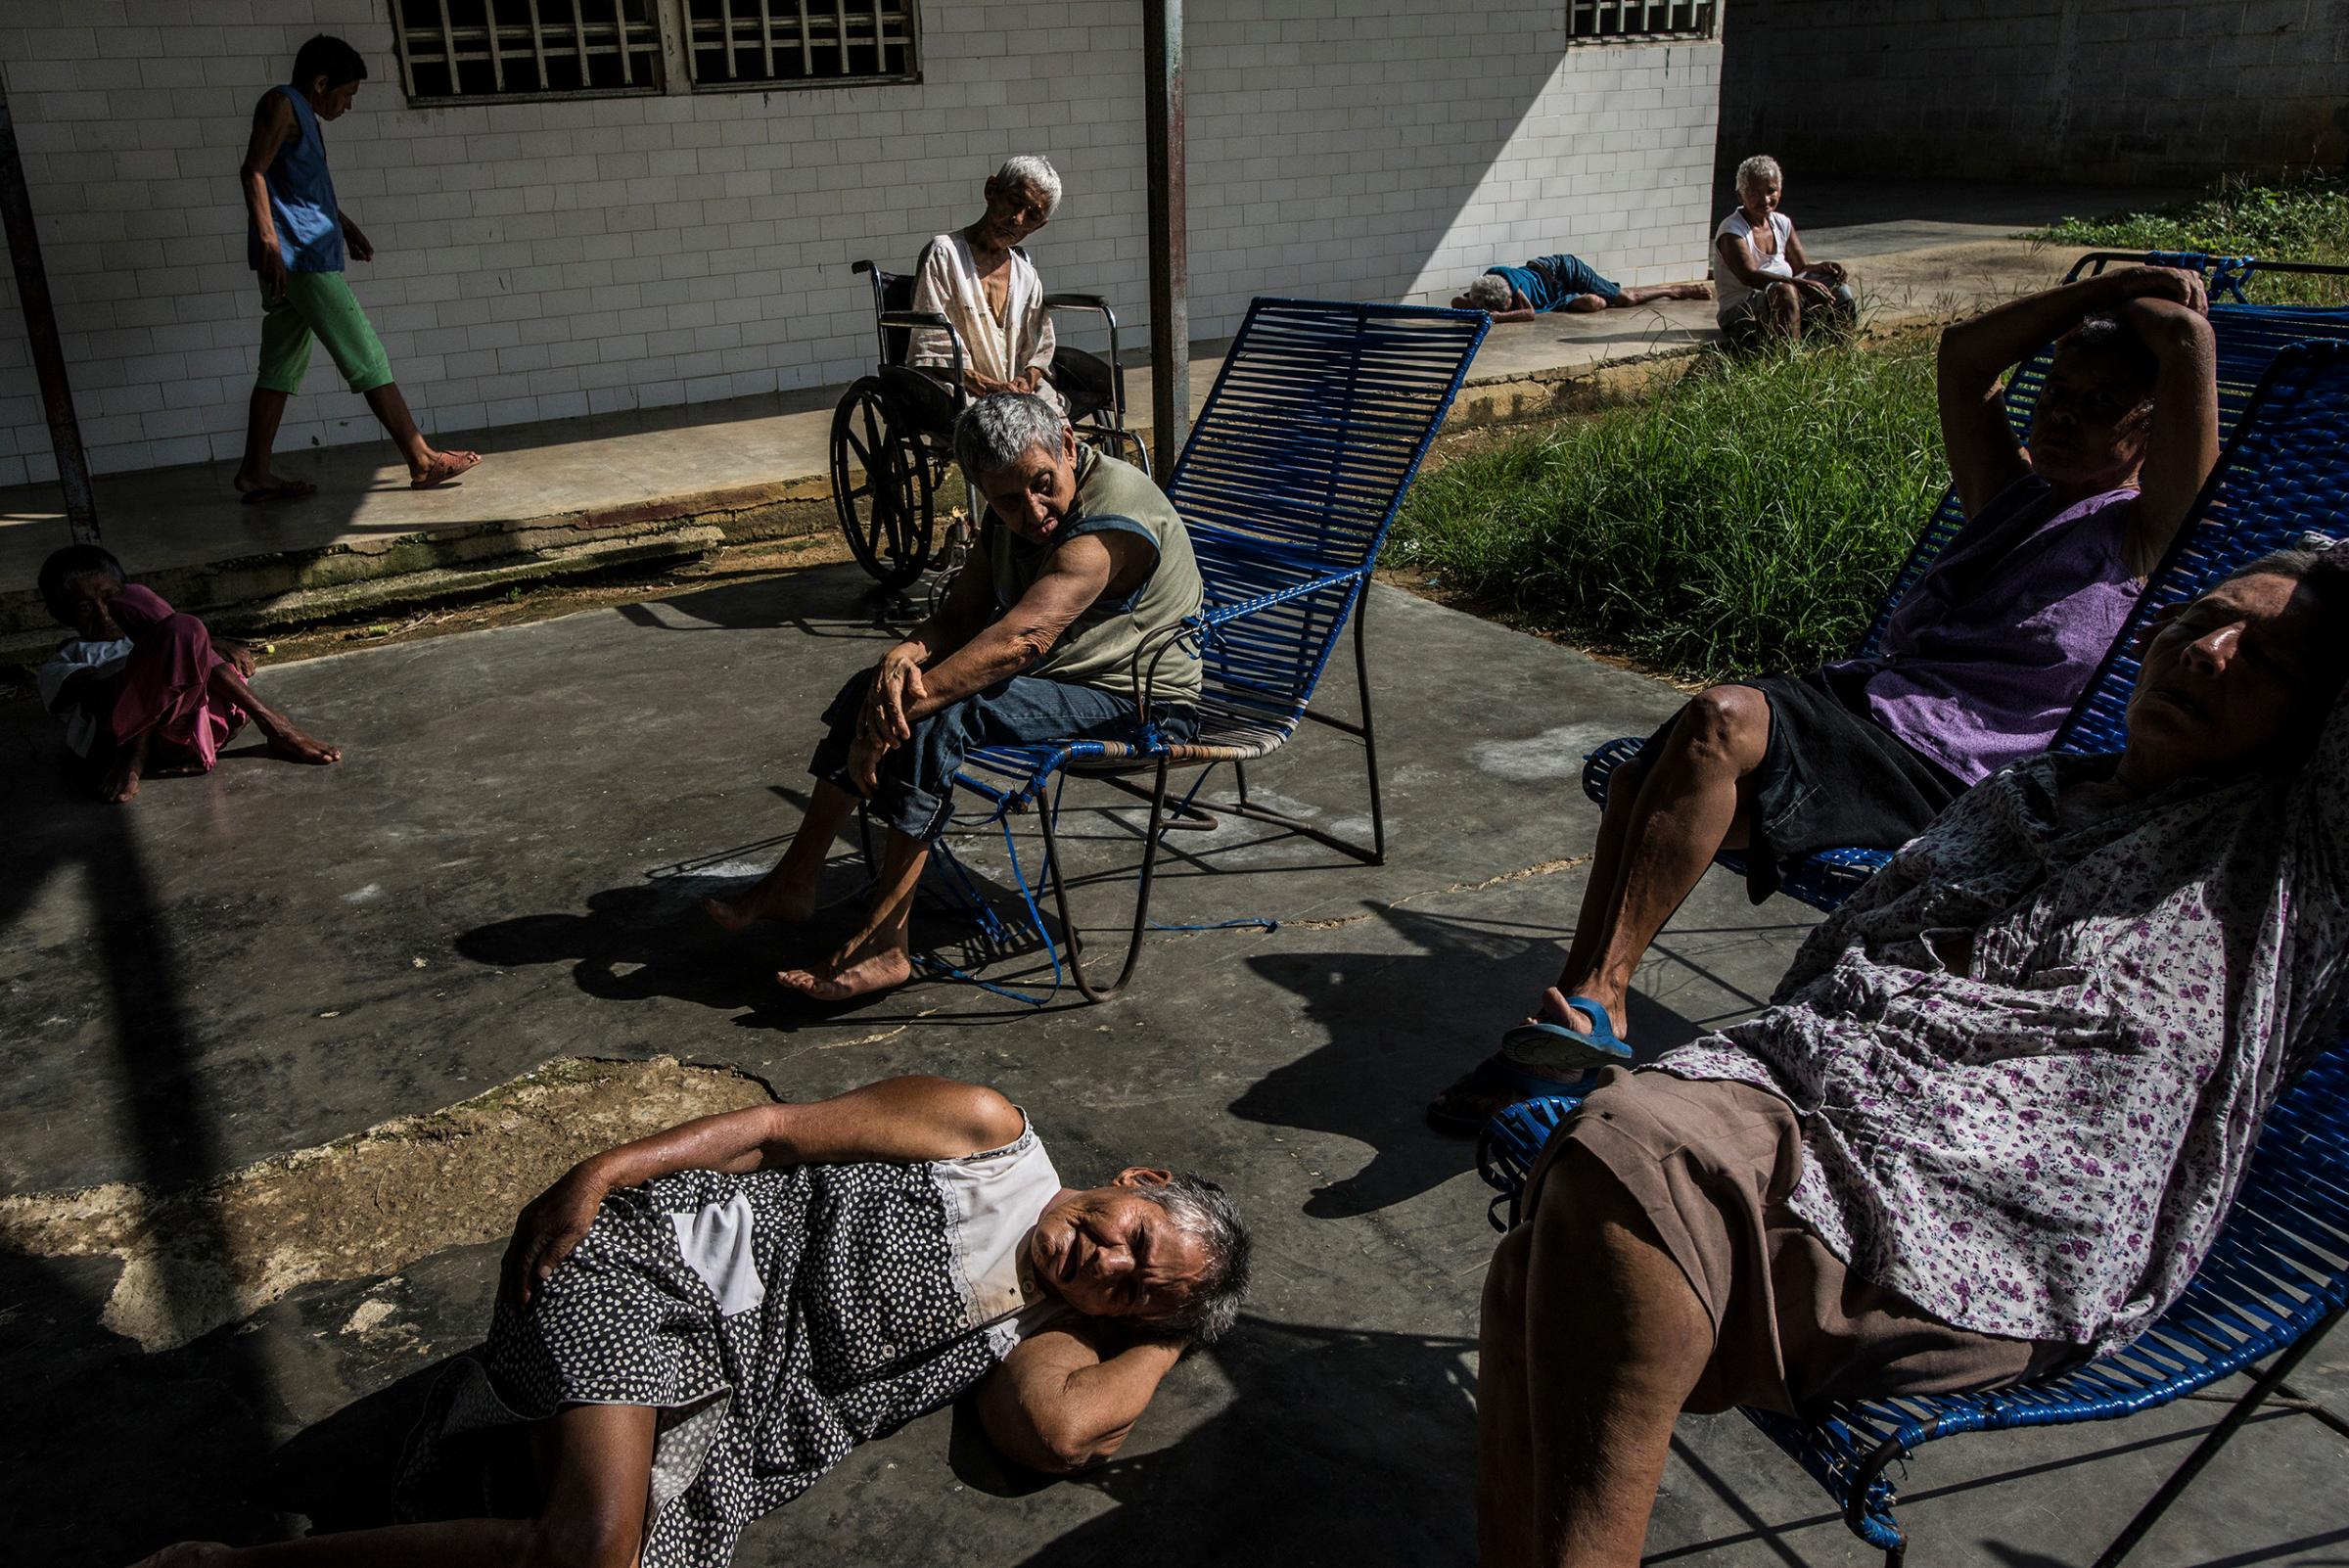 Patients in the patio of the women's ward of the state-run Pampero Psychiatric Hospital in Barquisimeto, Venezuela, on July 29, 2016.